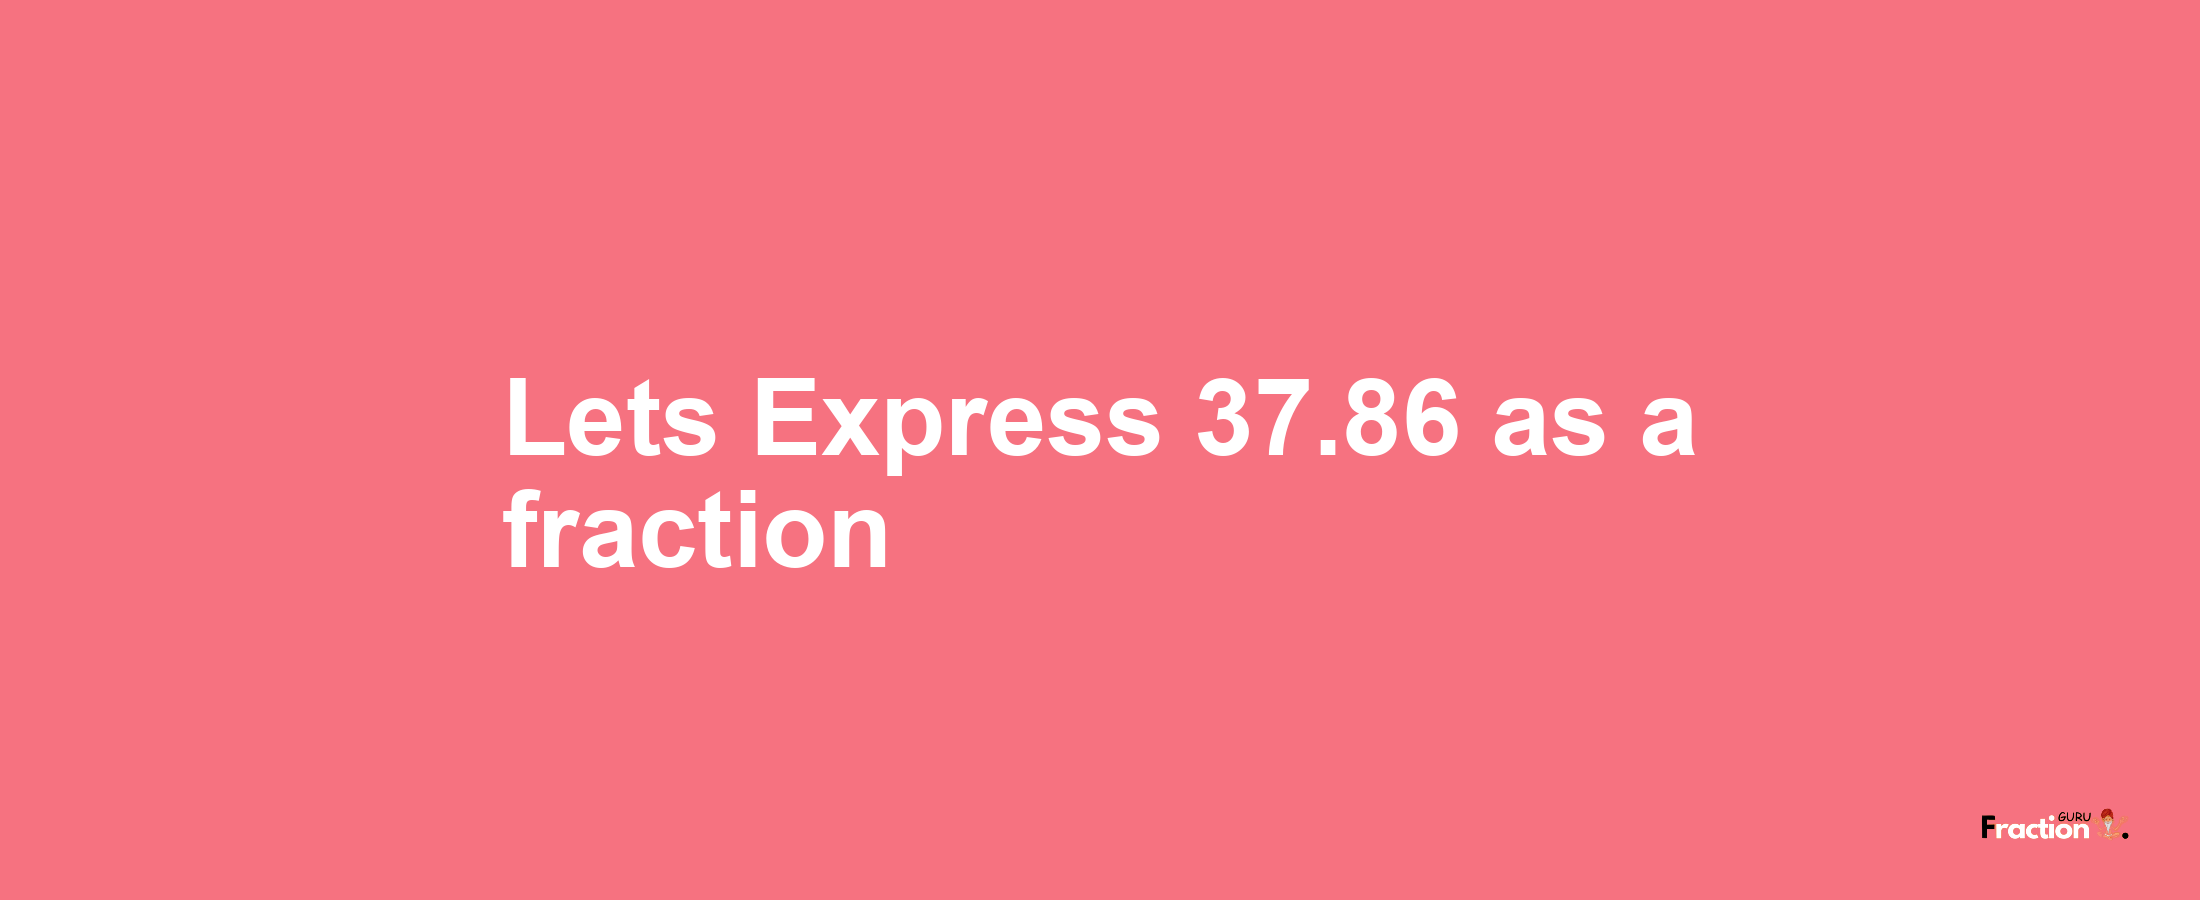 Lets Express 37.86 as afraction